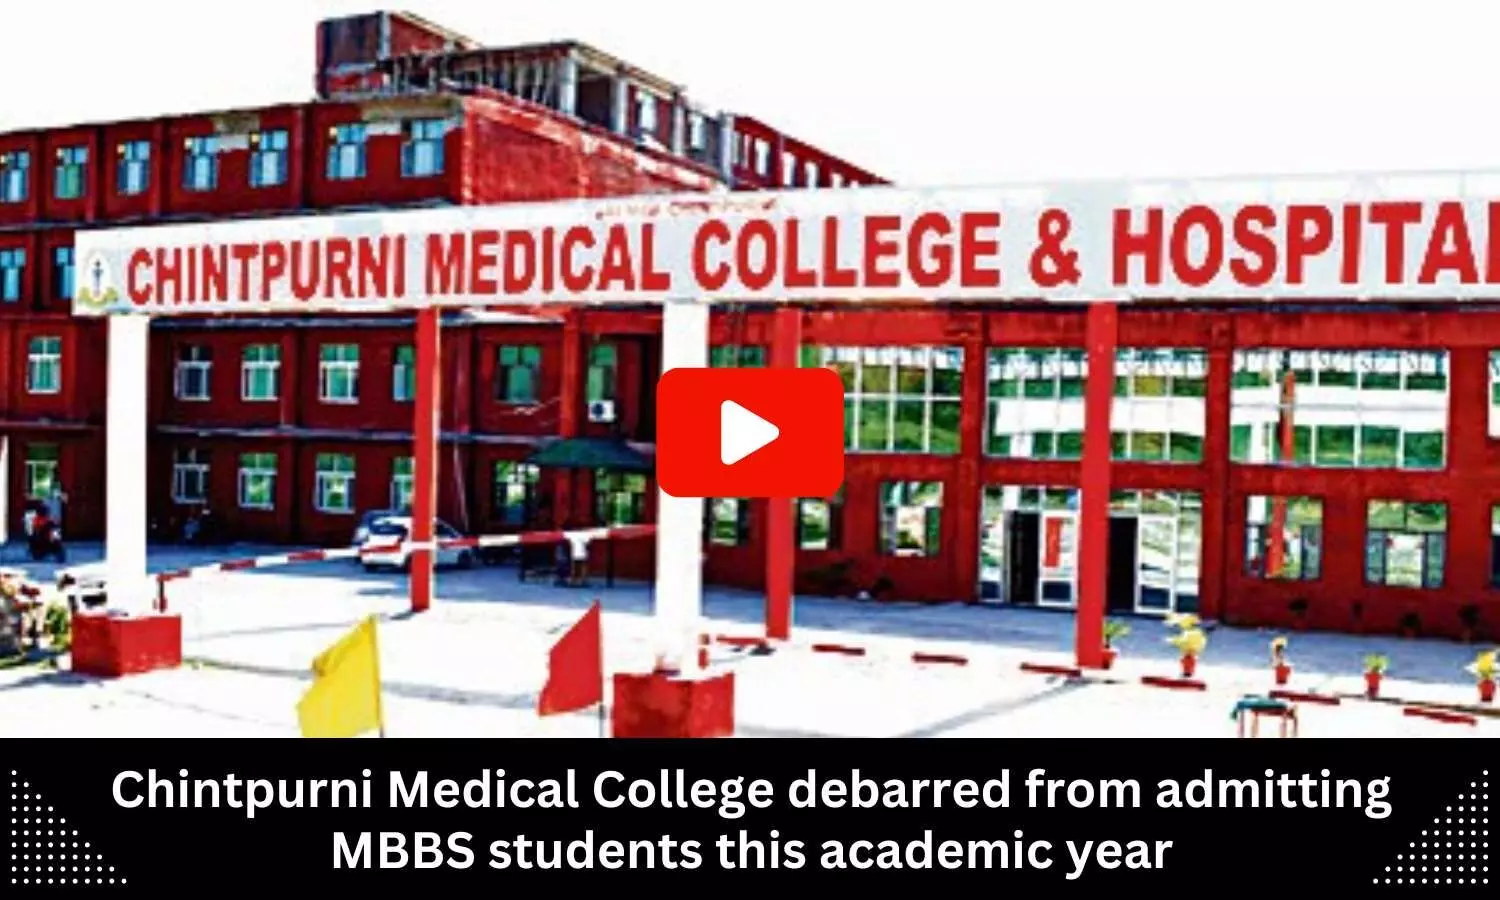 NMC debars Chintpurni Medical College from admitting MBBS students this academic year